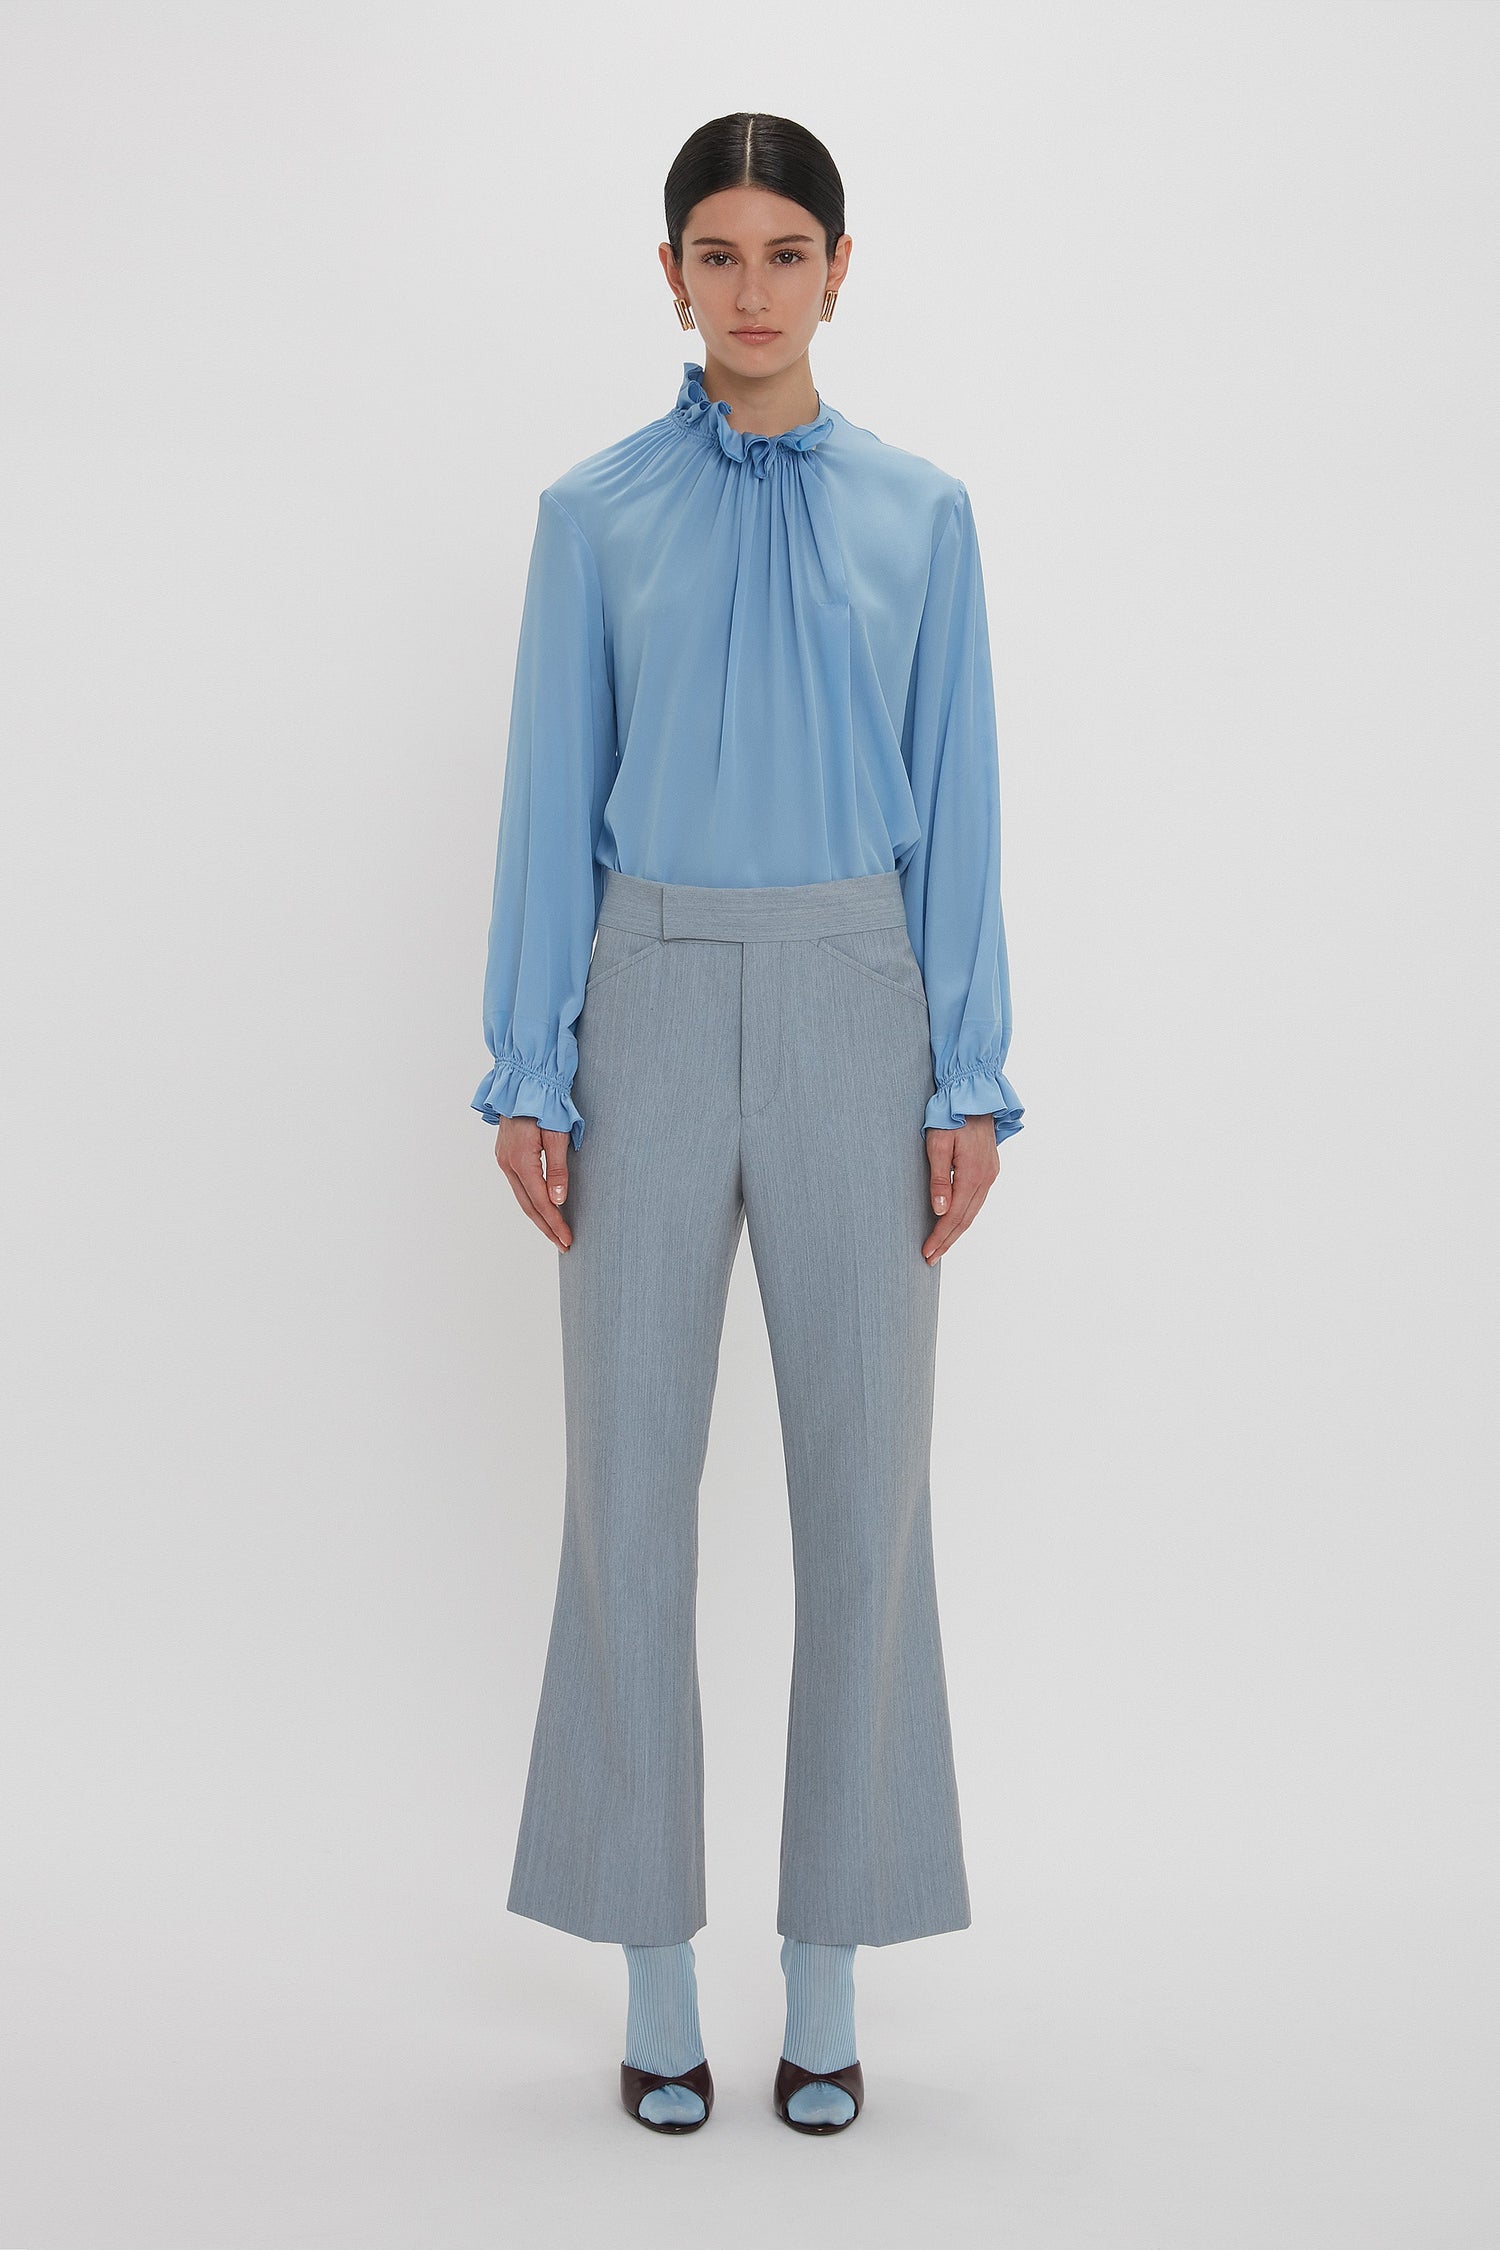 A person stands facing forward in a Victoria Beckham Exclusive Ruffle Neck Blouse In Cornflower Blue and gray pants with flared legs, set against a plain white background.